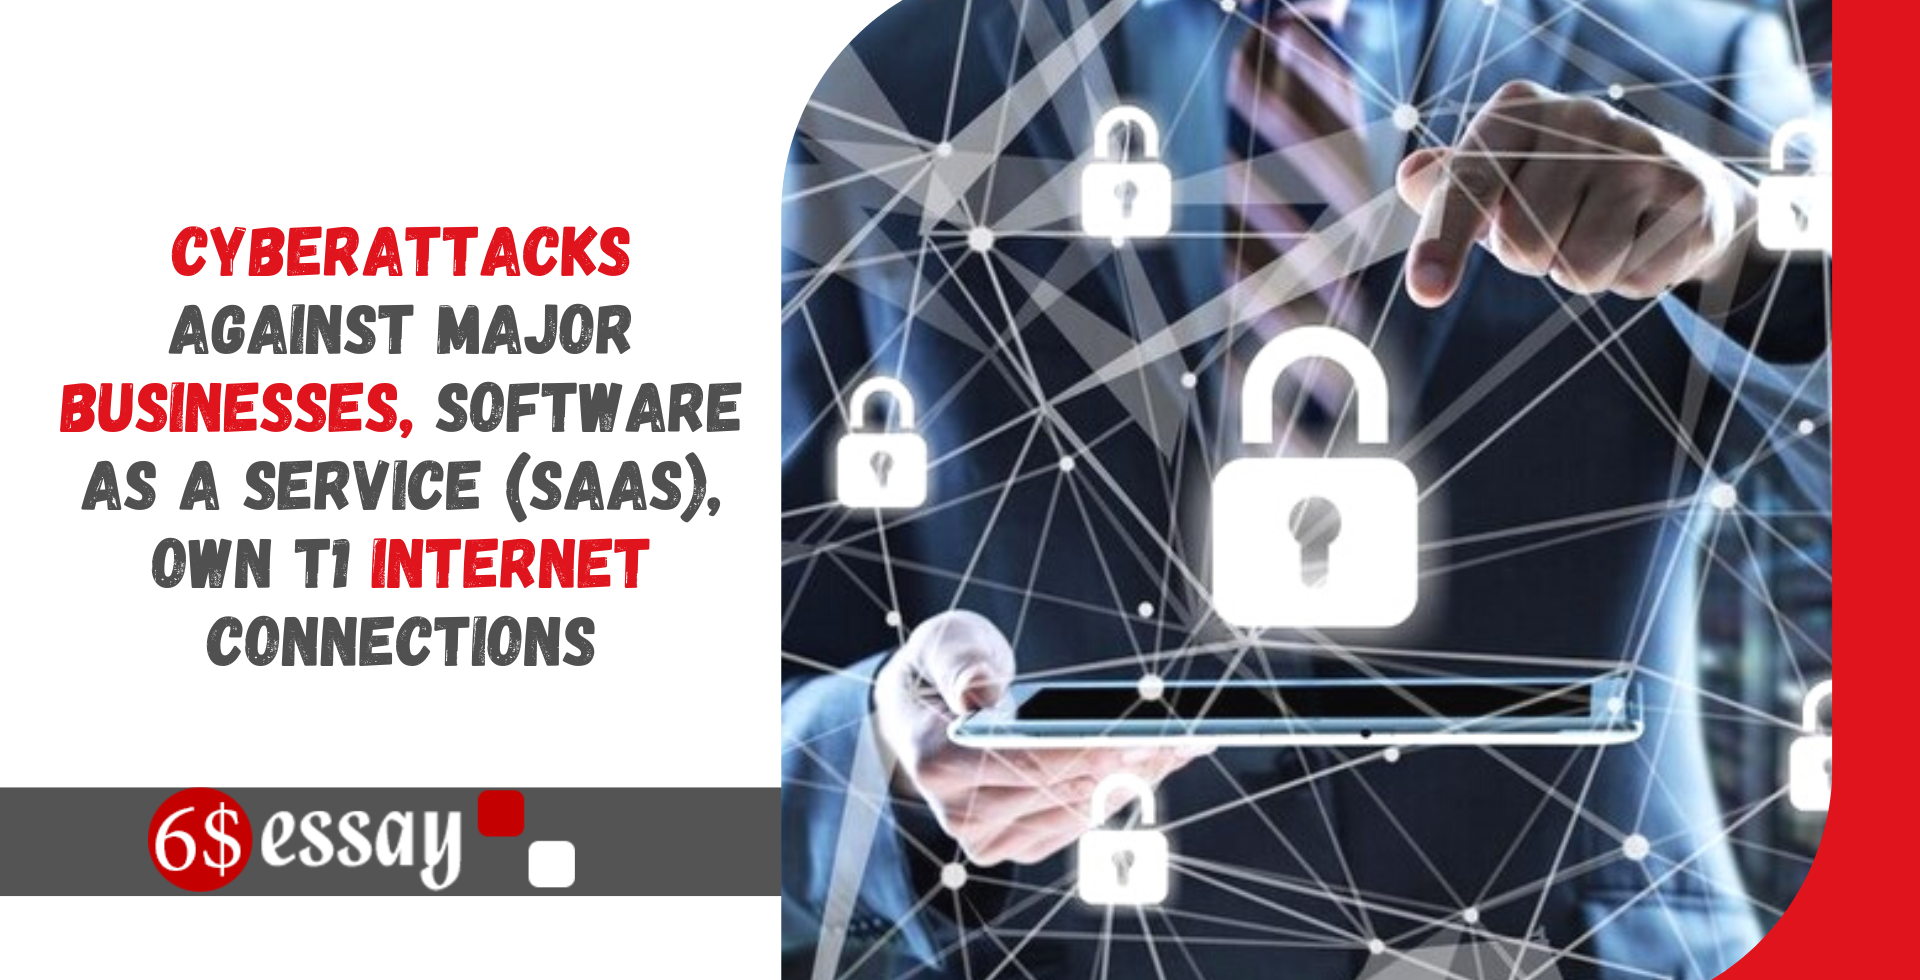 Cyberattacks against major businesses, Software as a Service (SaaS), own T1 internet connections